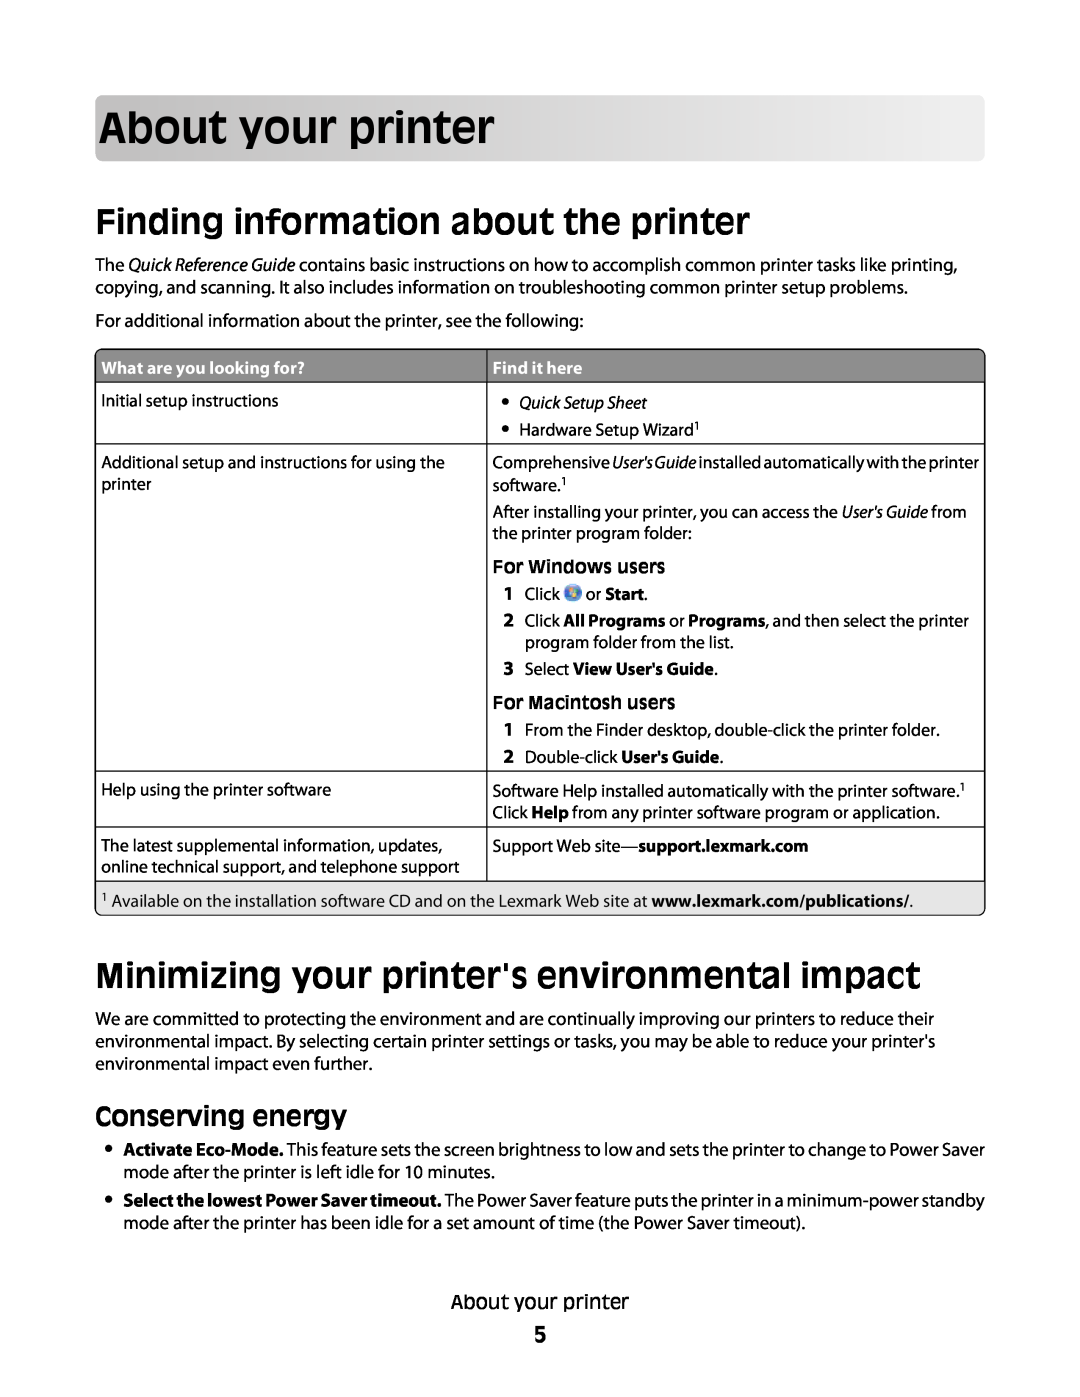 Lexmark S600 About your printer, Finding information about the printer, Minimizing your printers environmental impact 